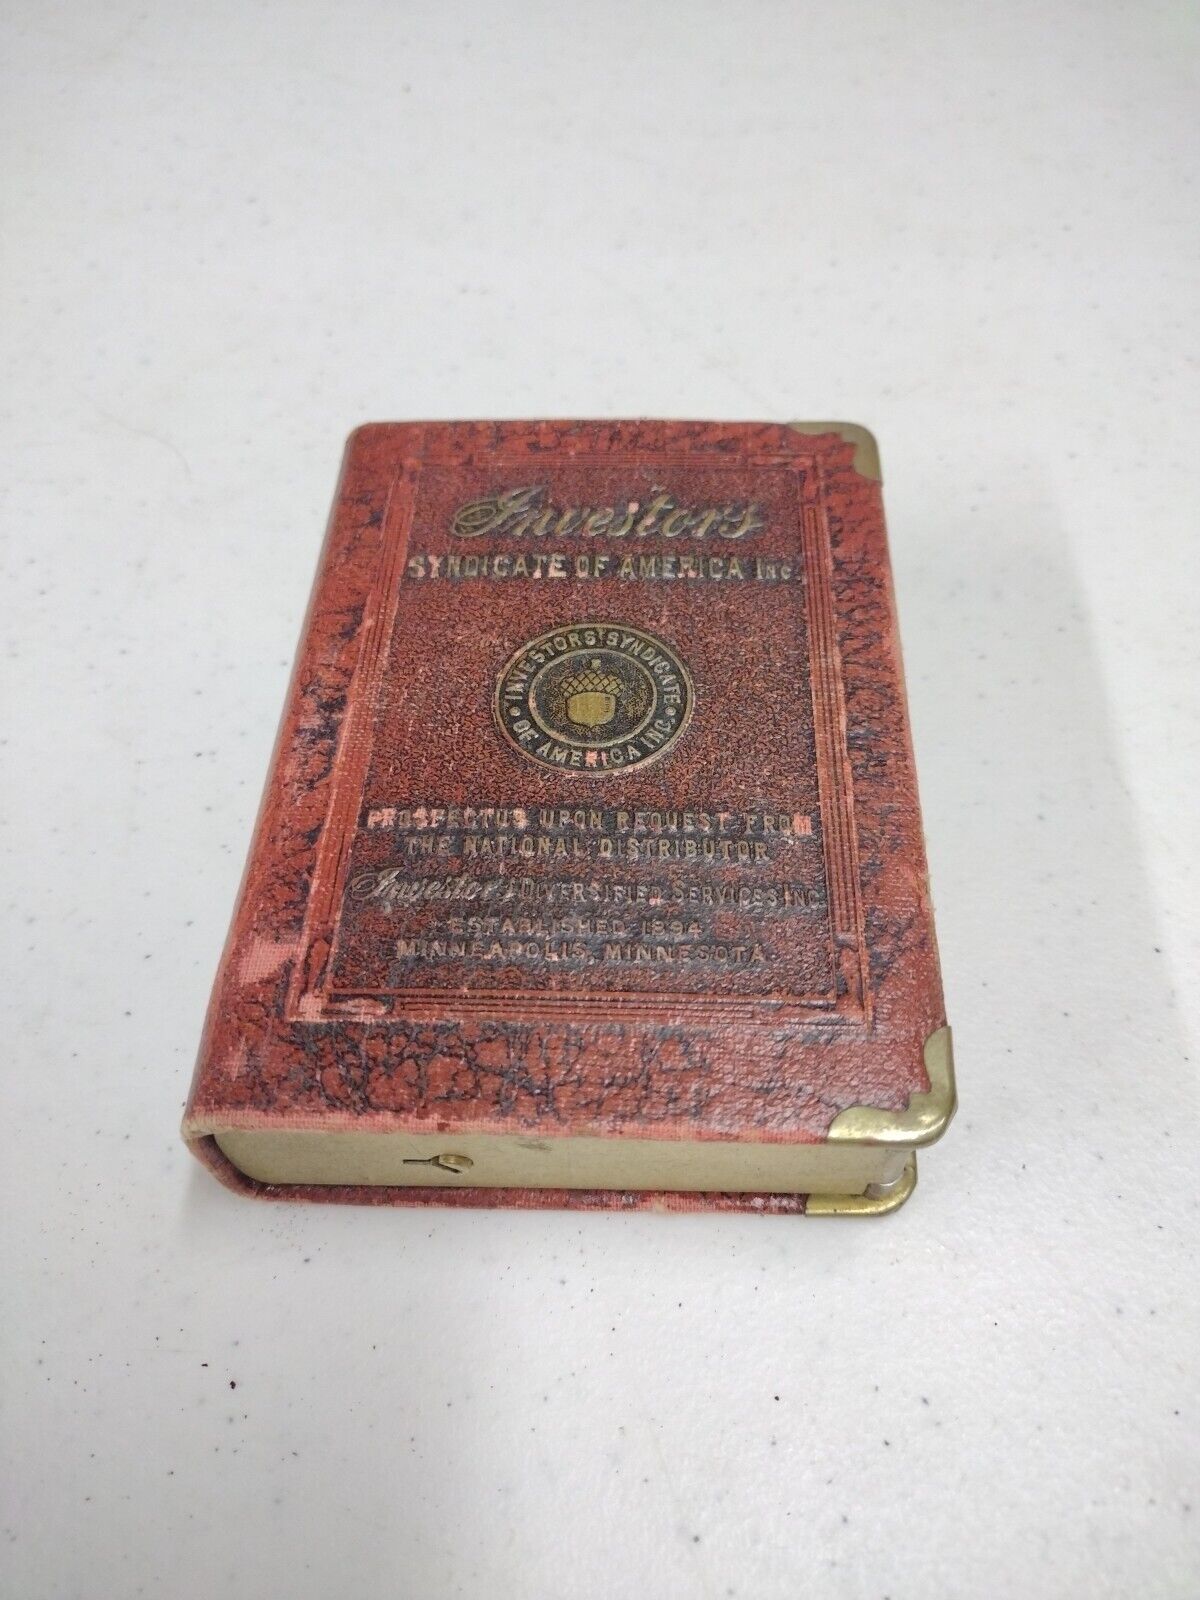 Antique Investor's Syndicate Of America Inc. Advertising Book Coin Bank